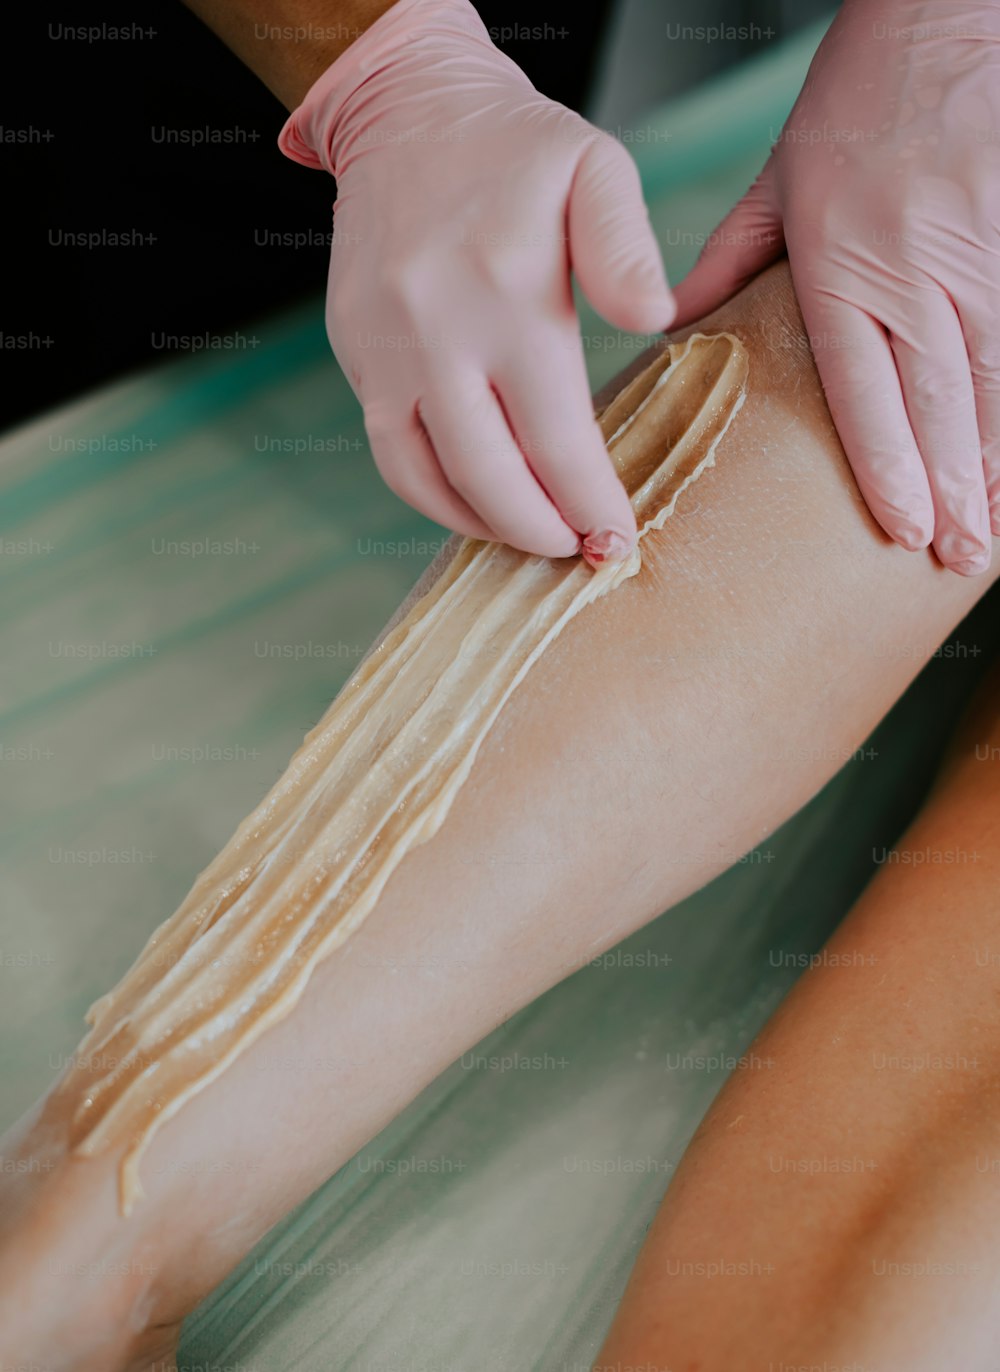 a person with a glove on is waxing a leg